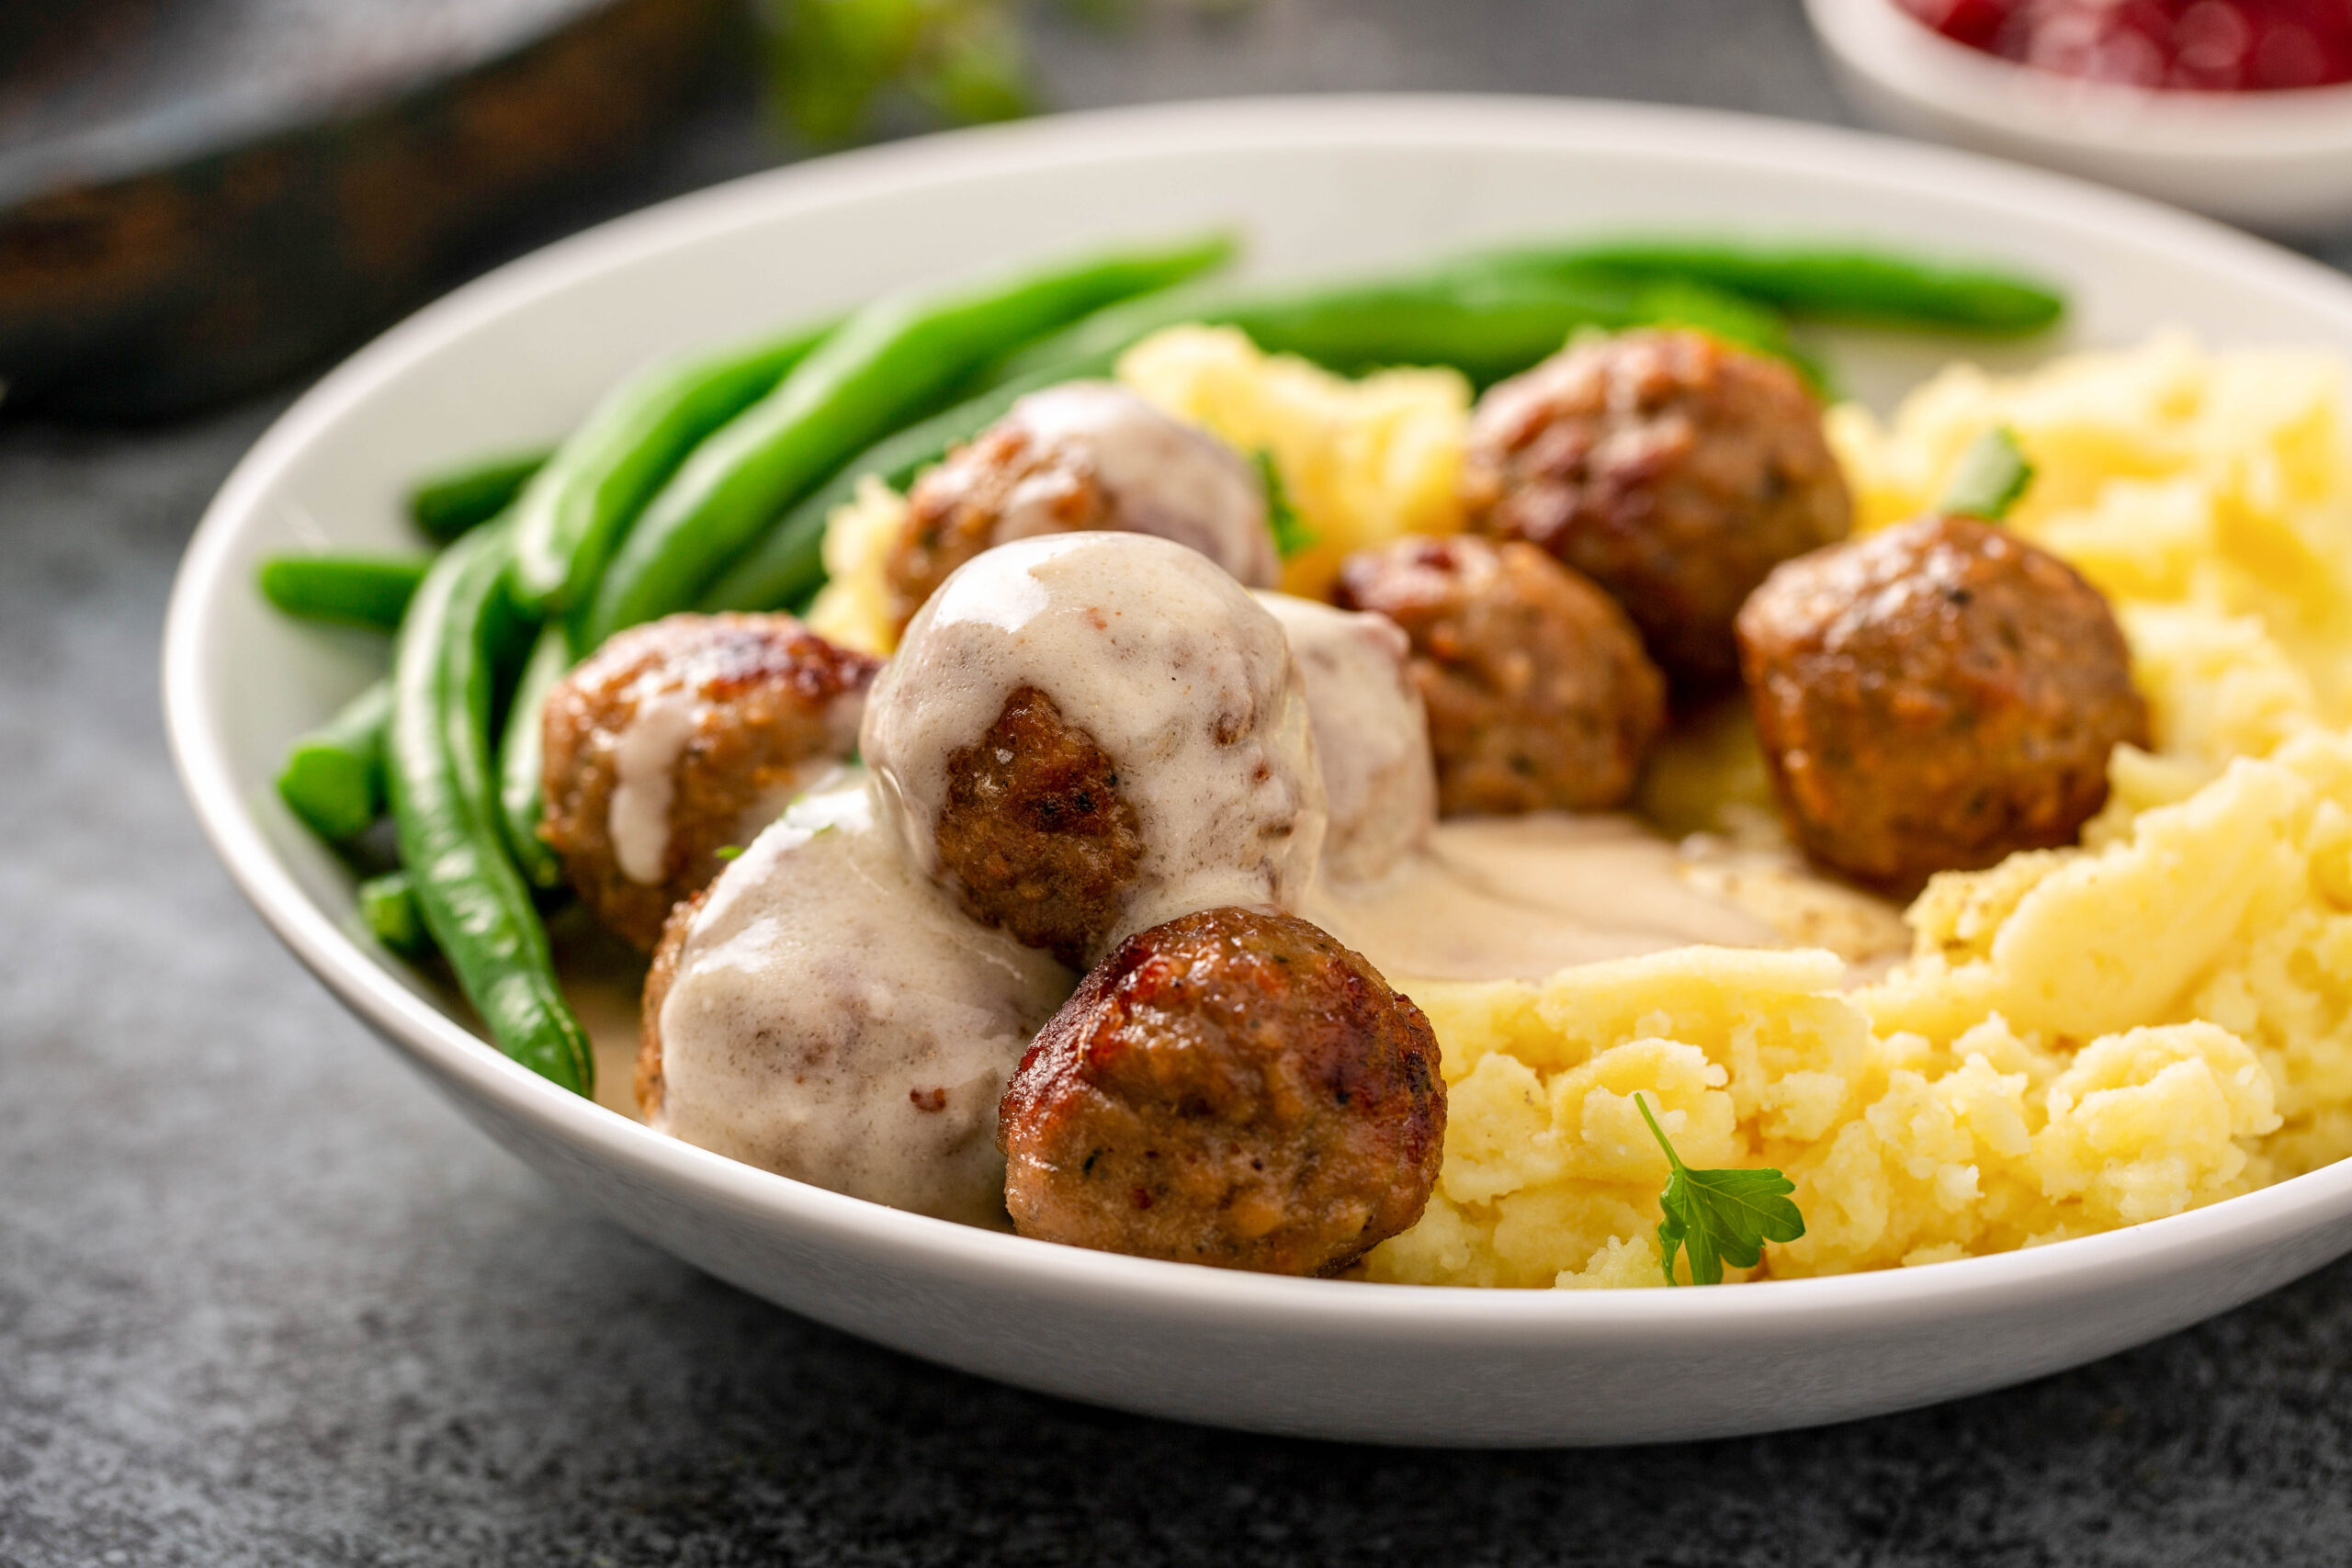 A Plate of Swedish Meatballs, Potatoes and Green Beans